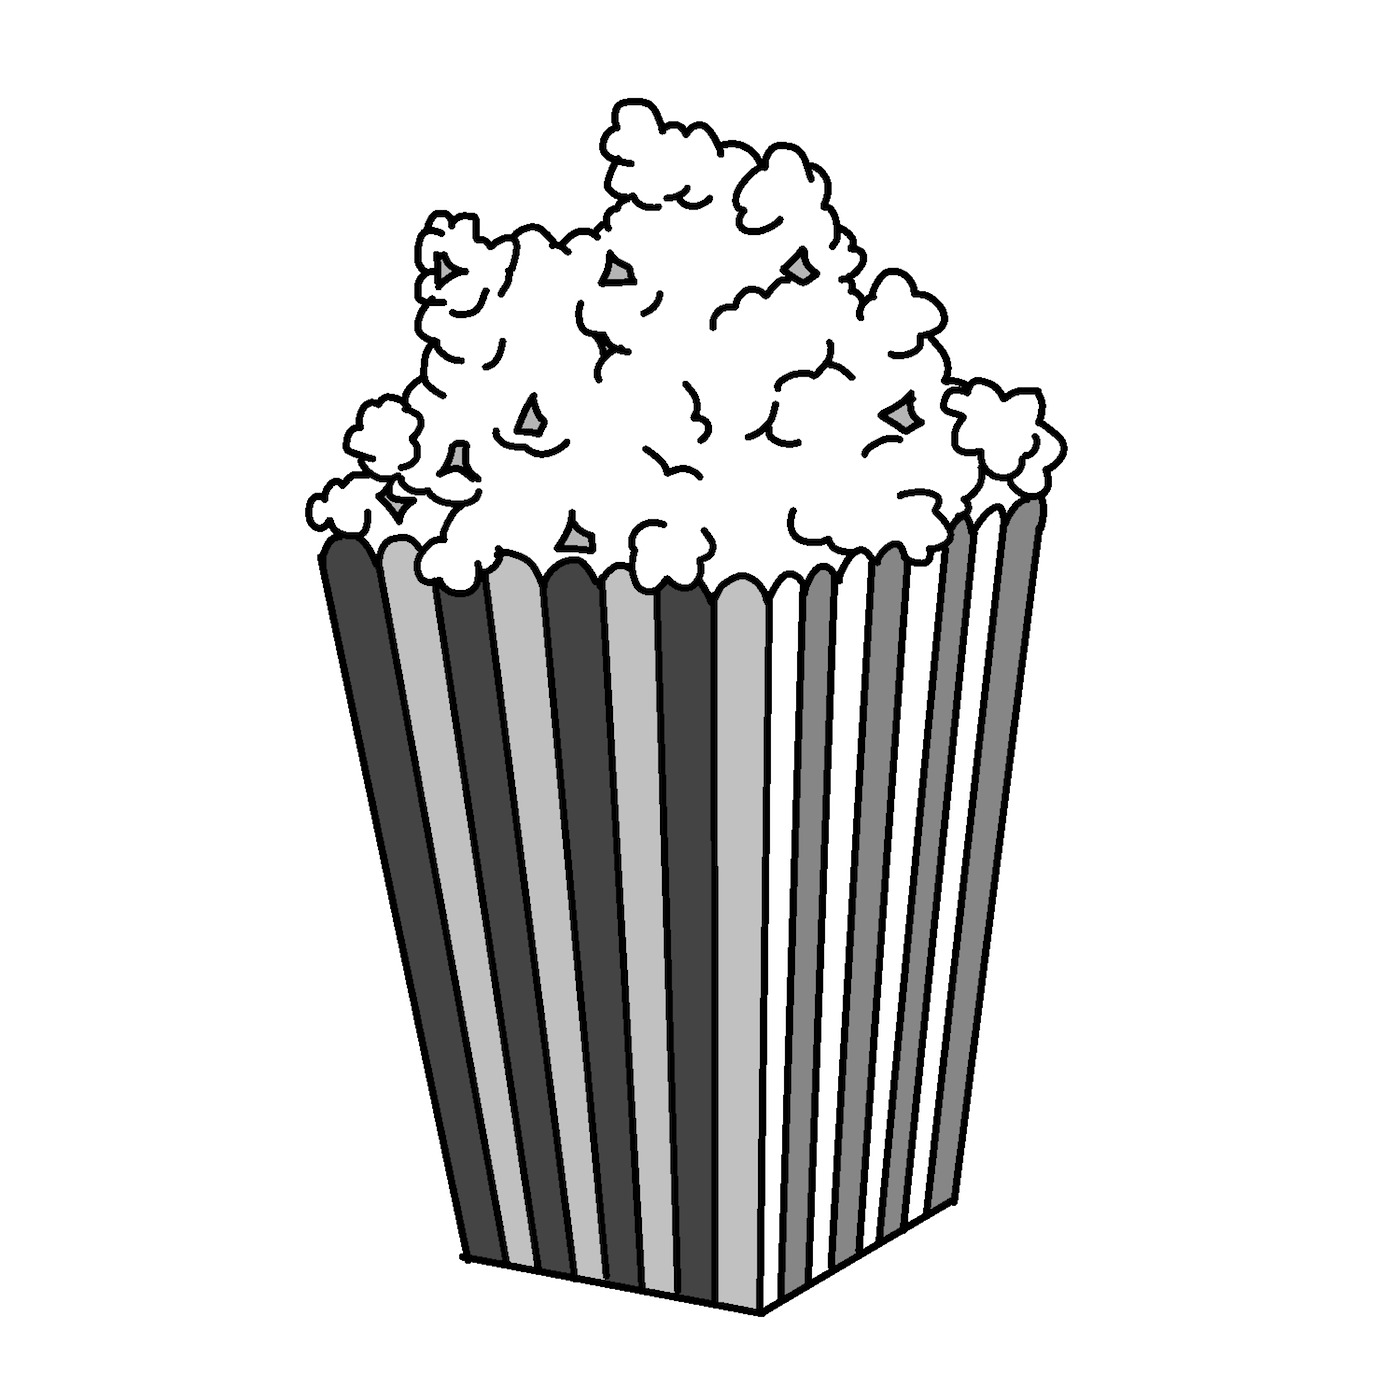 Popcorn In Striped Box Illustration png icons